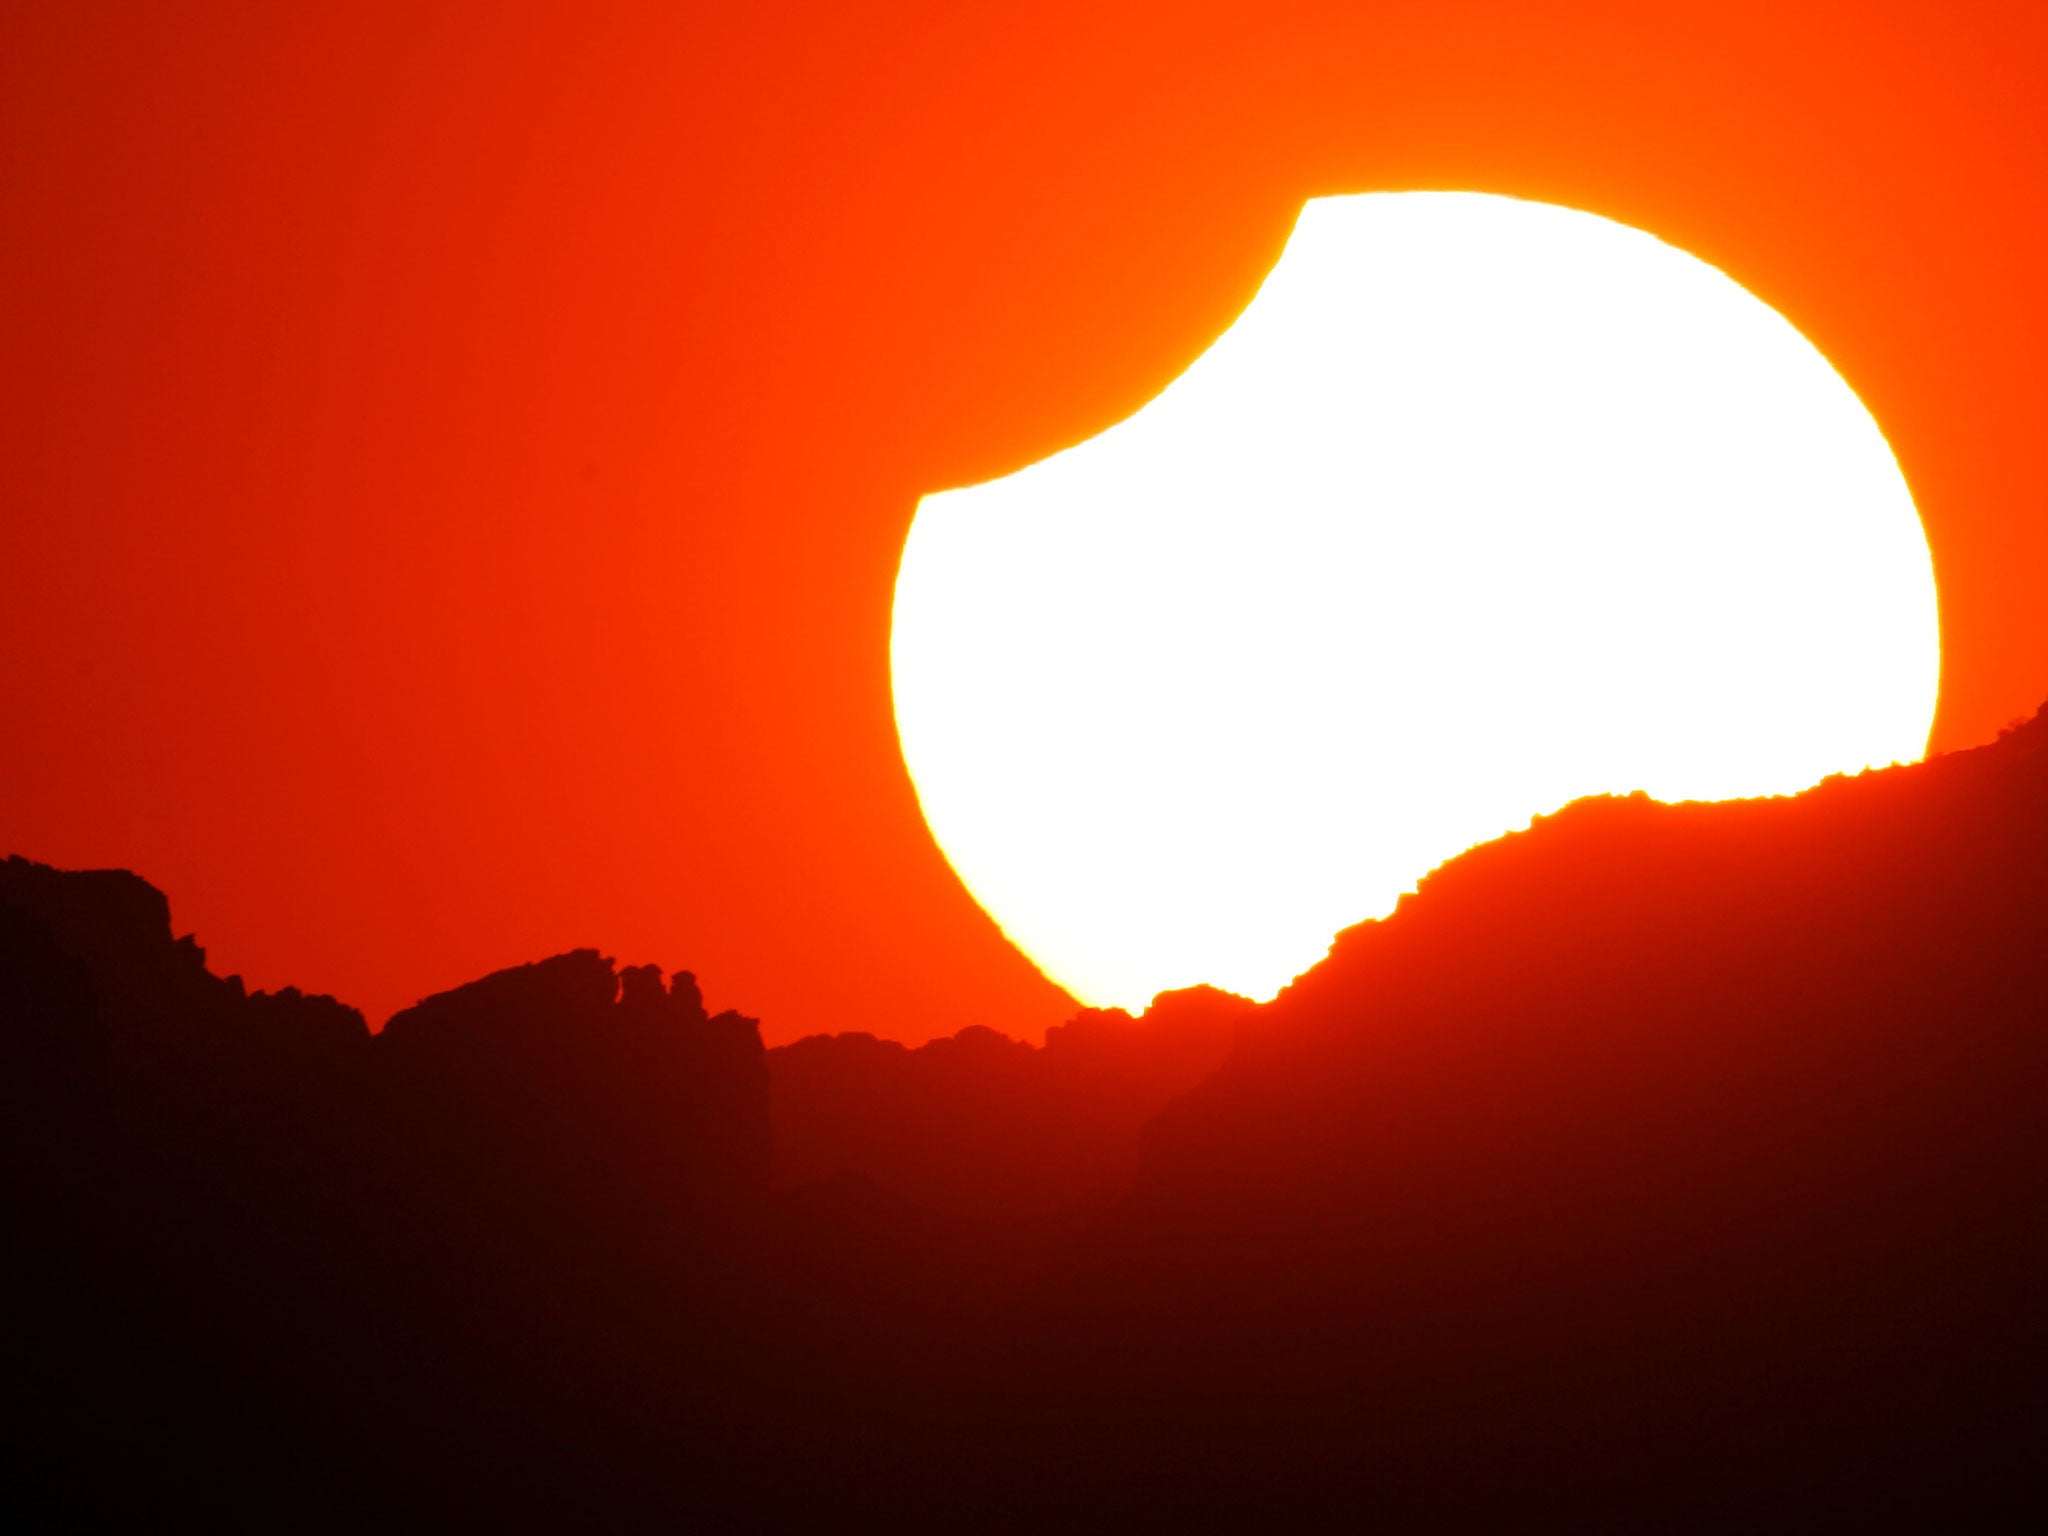 A partial eclipse seen in USA as the sun sets in Grand Canyon National Park, Arizona